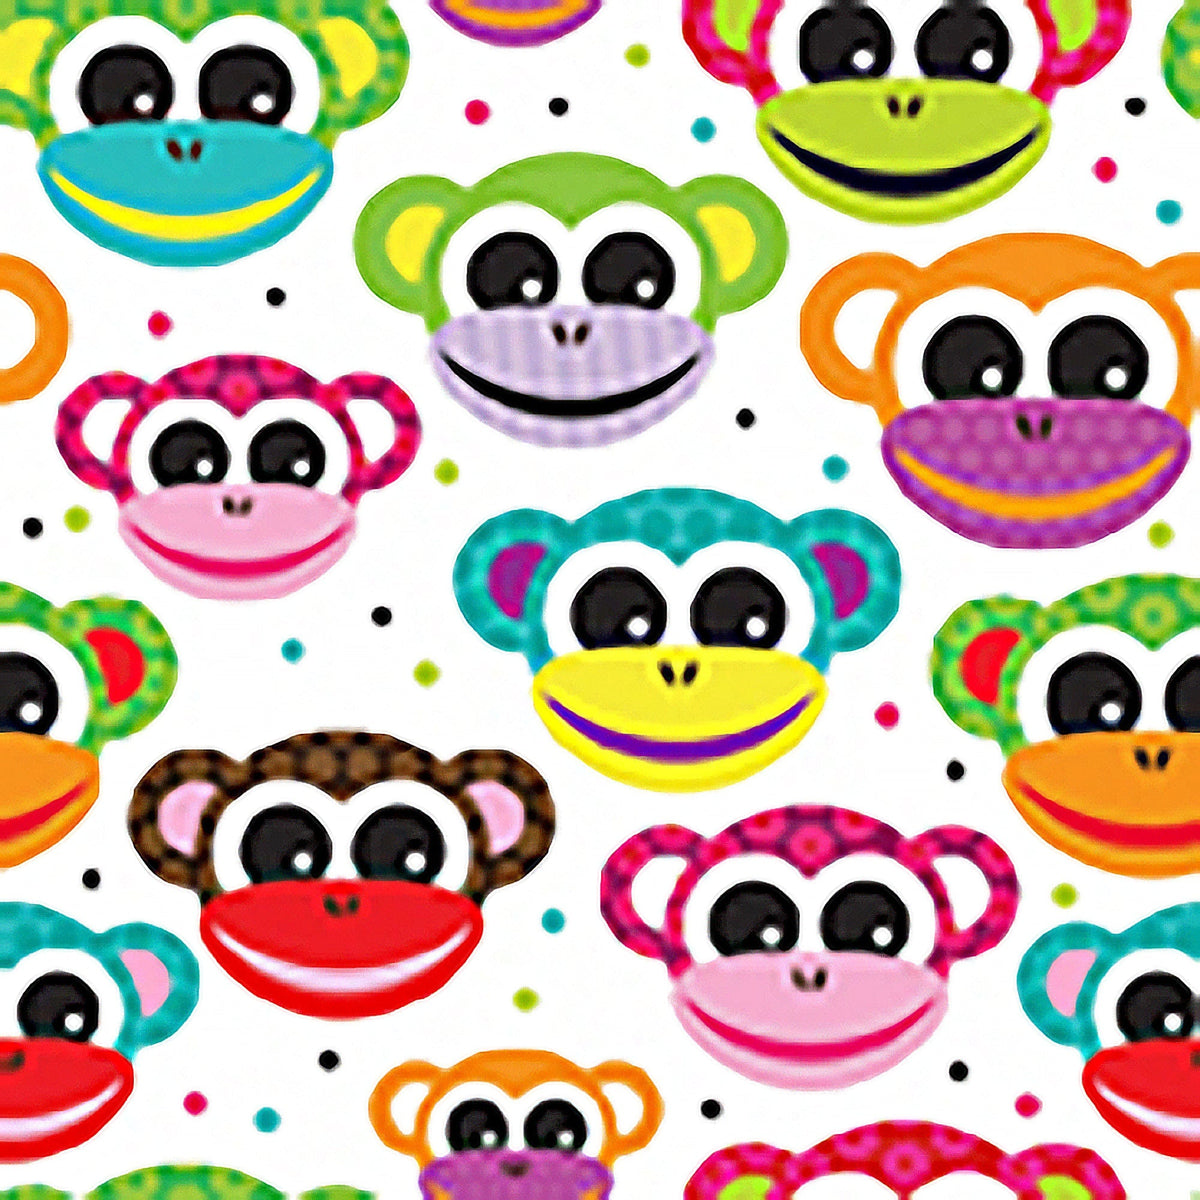 A-LINE Gift Wrap & Bags Monkeys Gift Wrap Roll, 30 x 72 Inches, 1 Count 882636600621